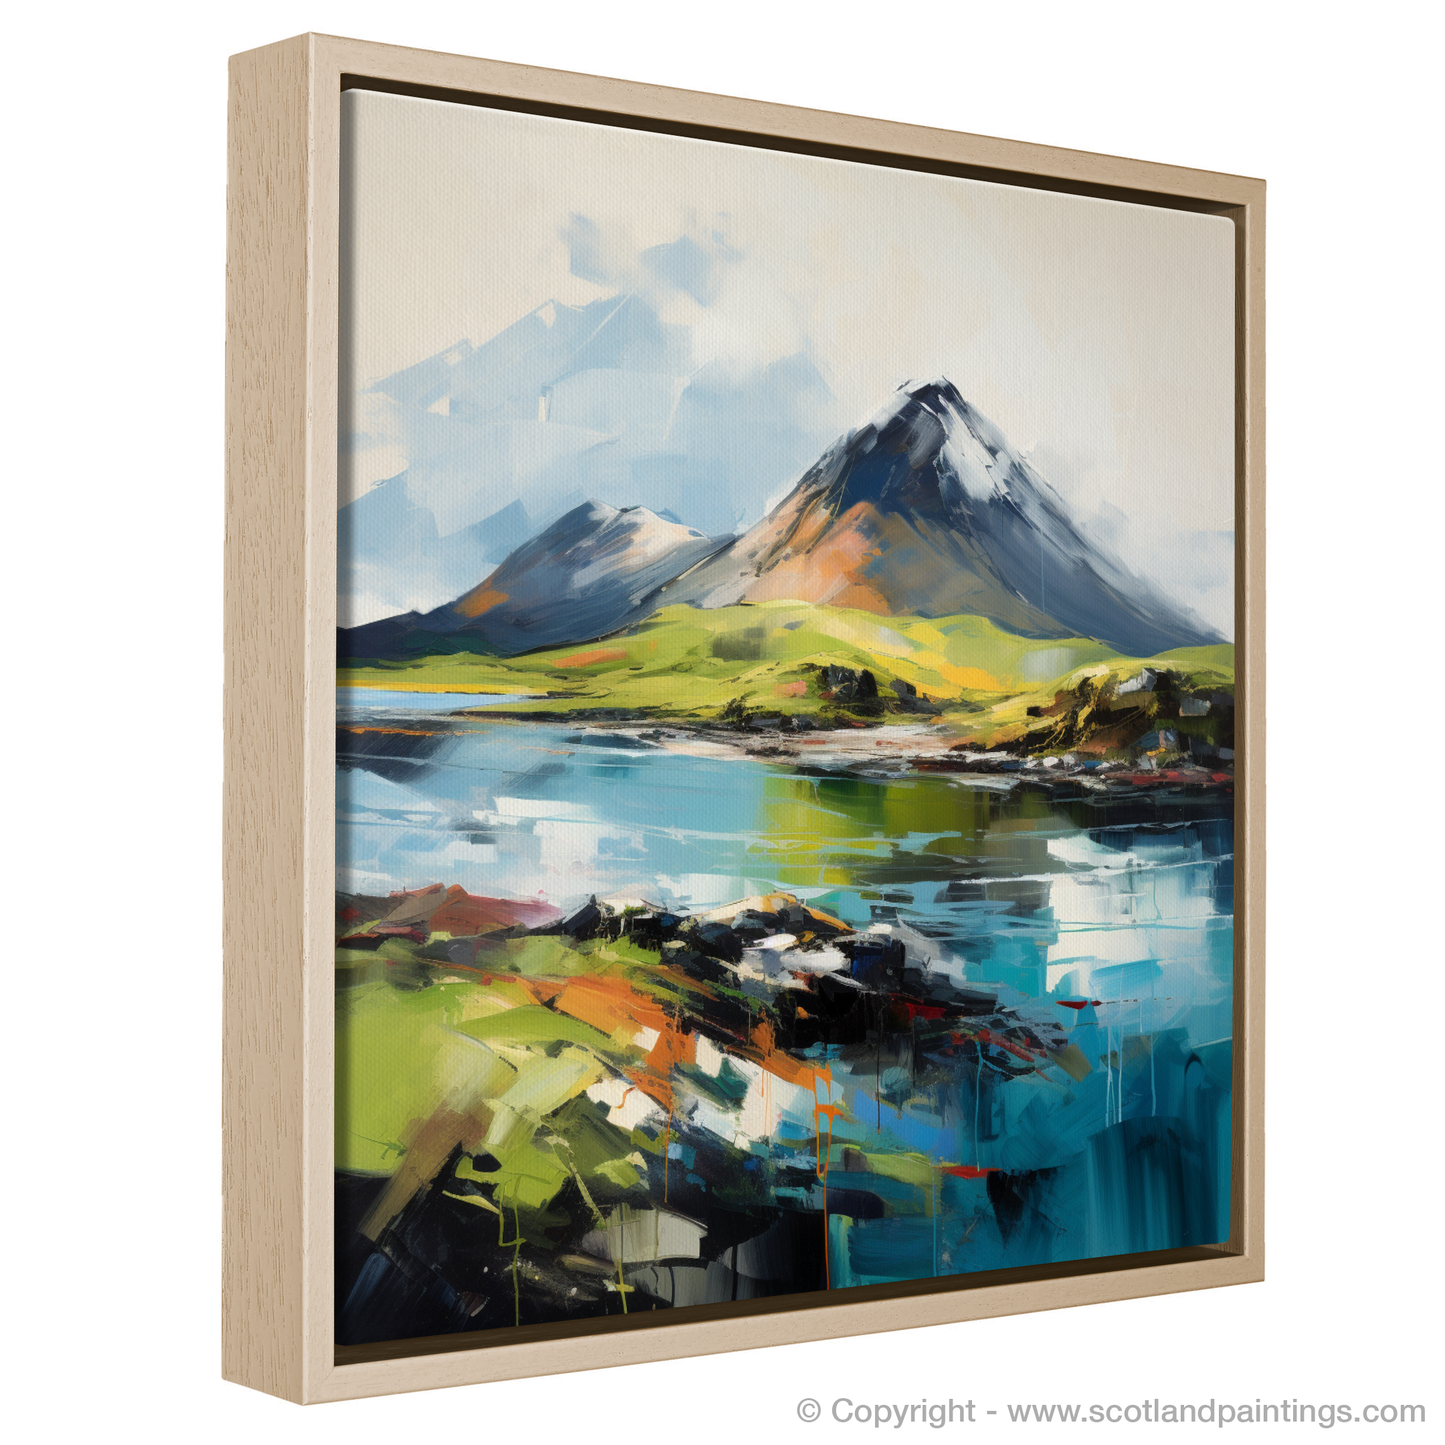 Painting and Art Print of Ben More, Isle of Mull entitled "Majestic Ben More: An Expressionist Tribute to Scottish Highlands".